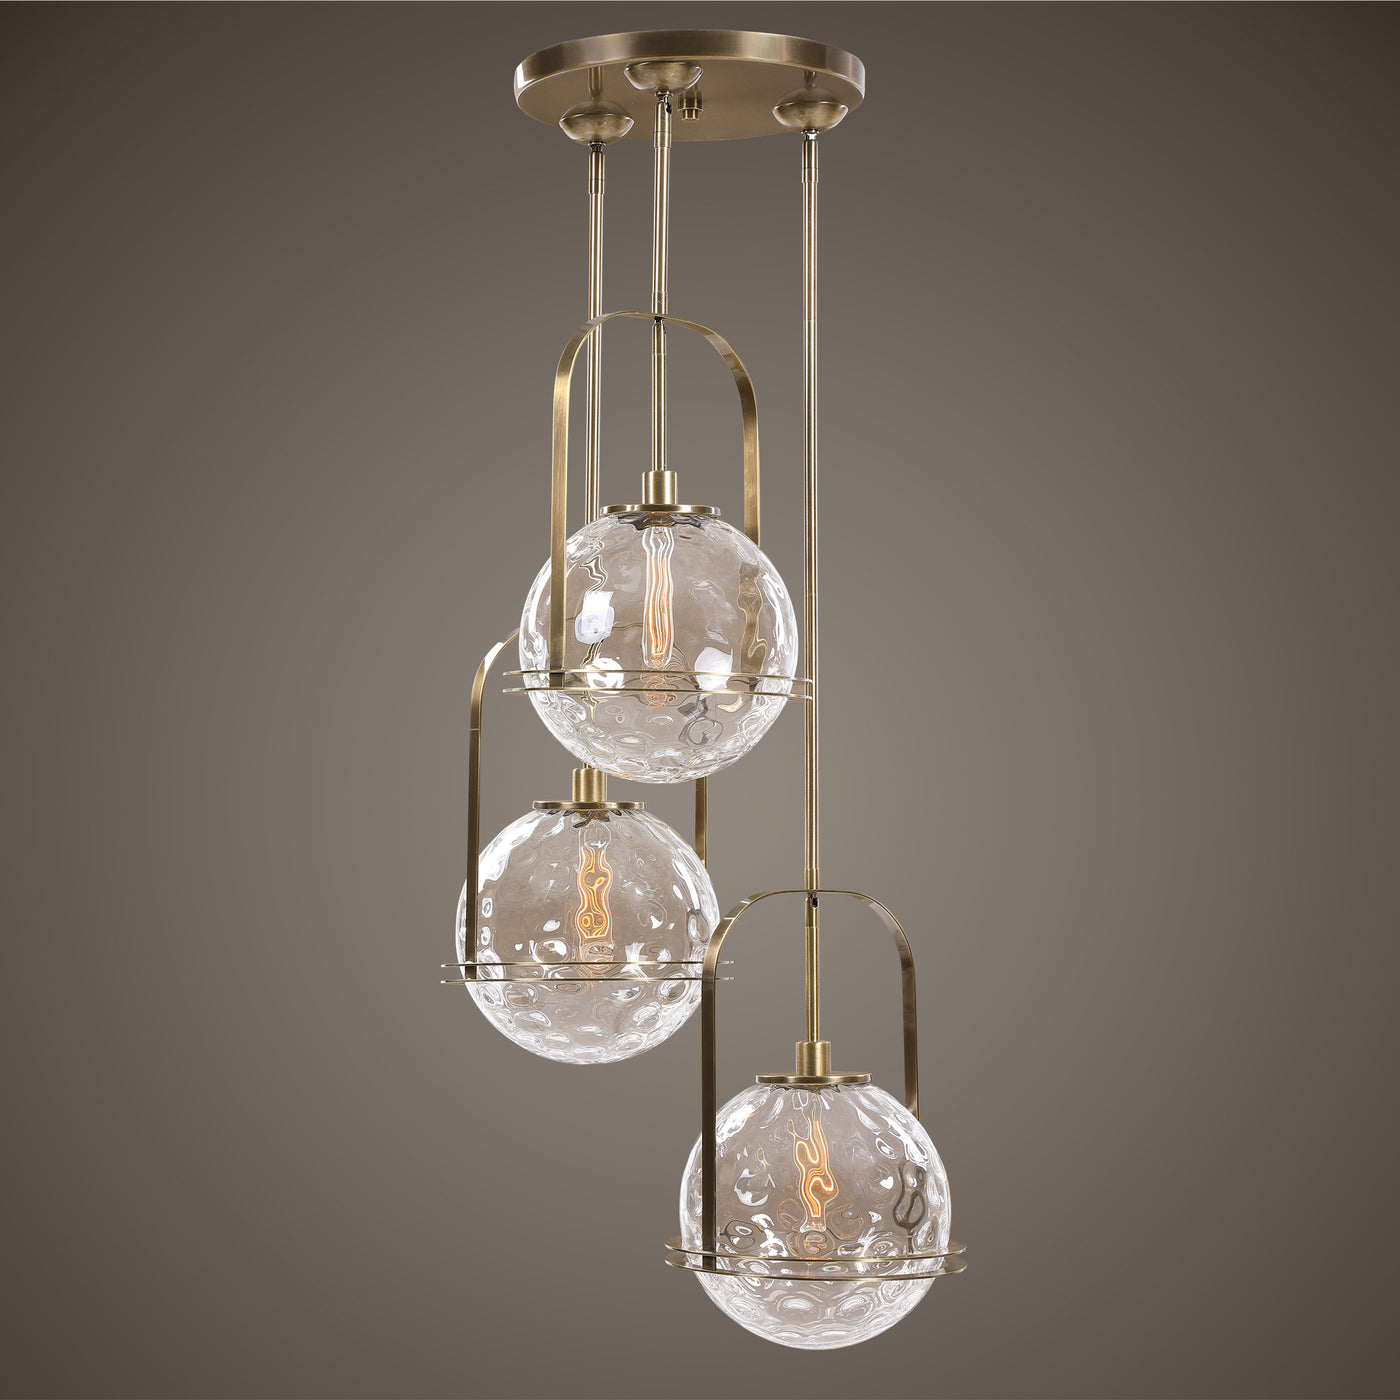 Soft Contemporary Lines Anchor These Oversized Floating Spheres Of Clear Watered Glass All Enhanced With Rich Antique Bras...